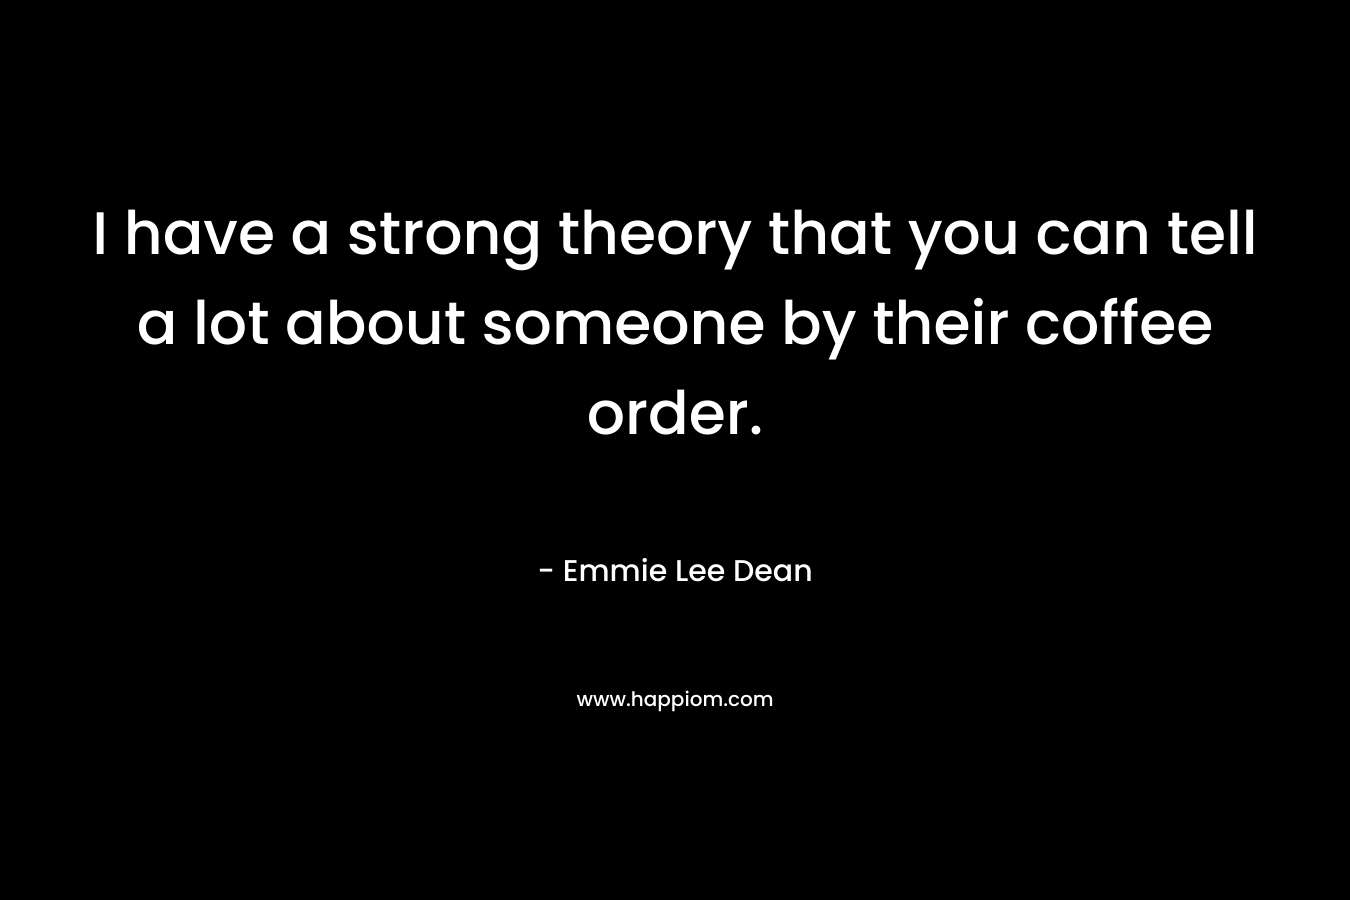 I have a strong theory that you can tell a lot about someone by their coffee order. – Emmie Lee Dean